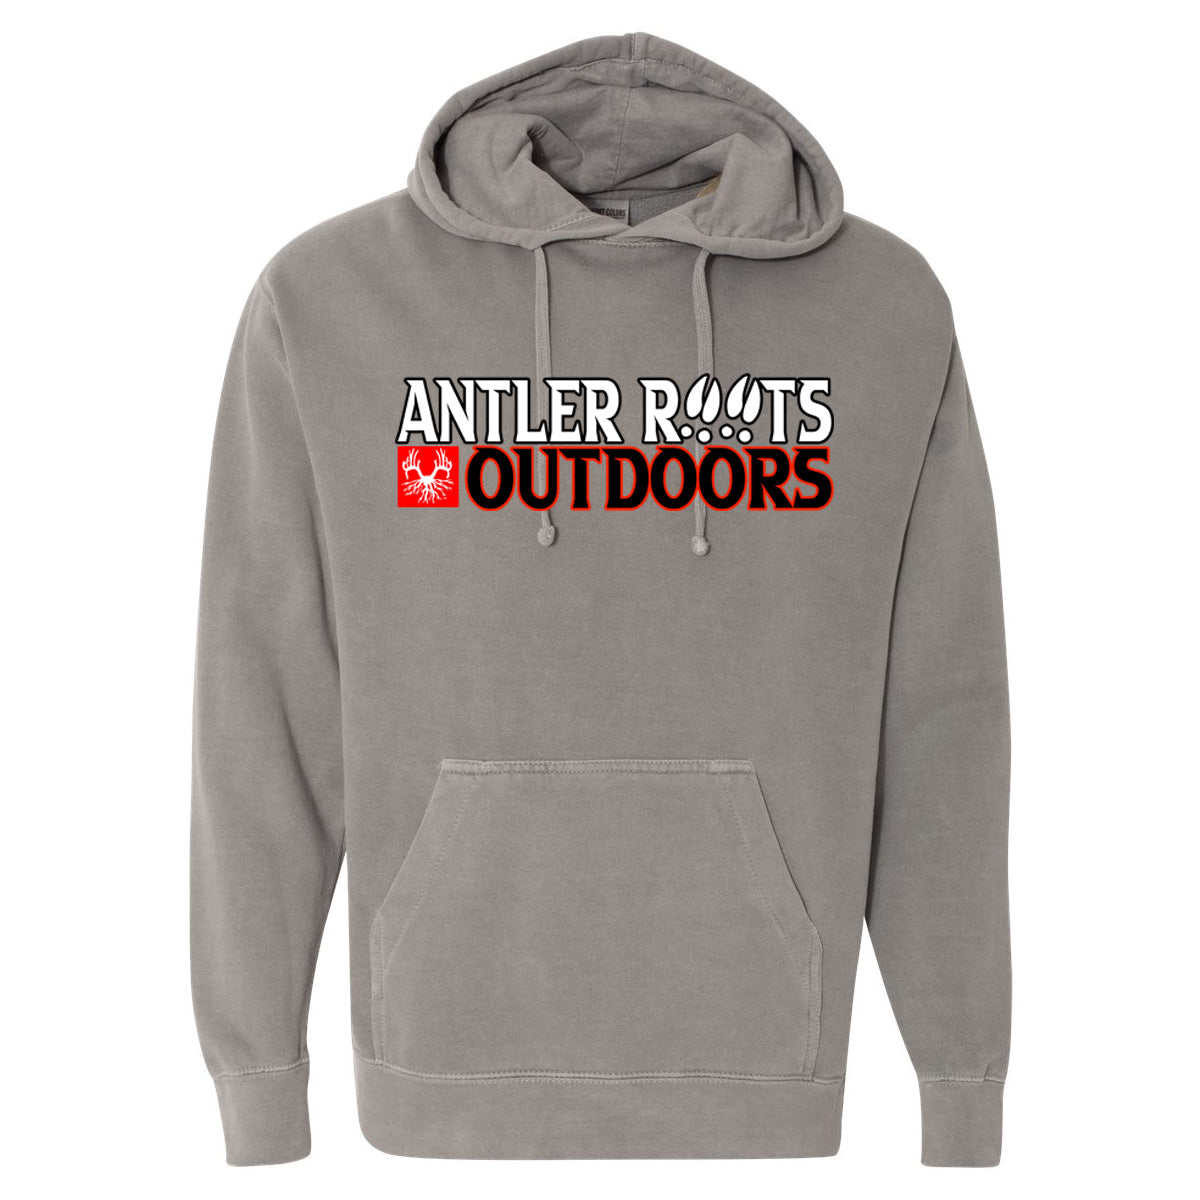 Antler Roots - Antler Roots Outdoors with logo in box - Comfort Color - Grey (Tee/Hoodie/Sweatshirt) - Southern Grace Creations